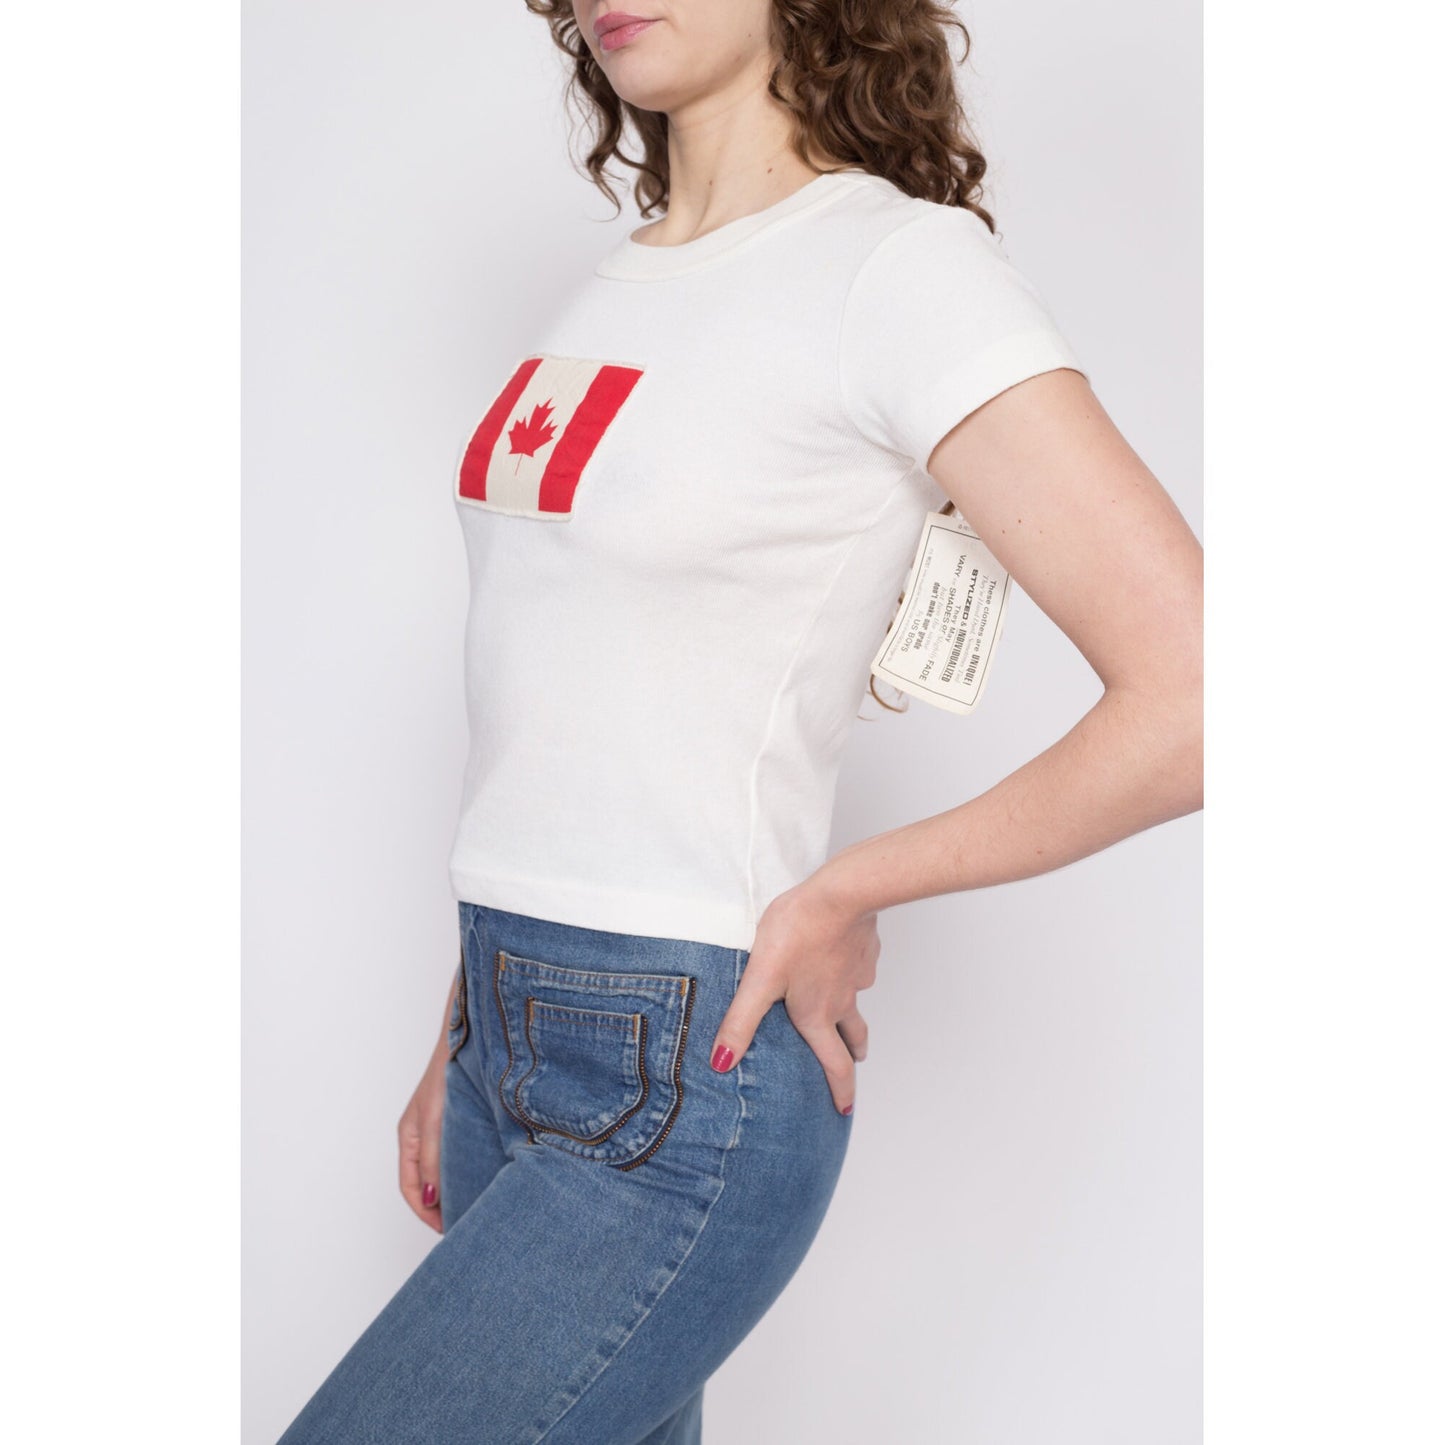 90s Canadian Flag T Shirt - Small | Vintage White Cotton Fitted Graphic Tourist Tee